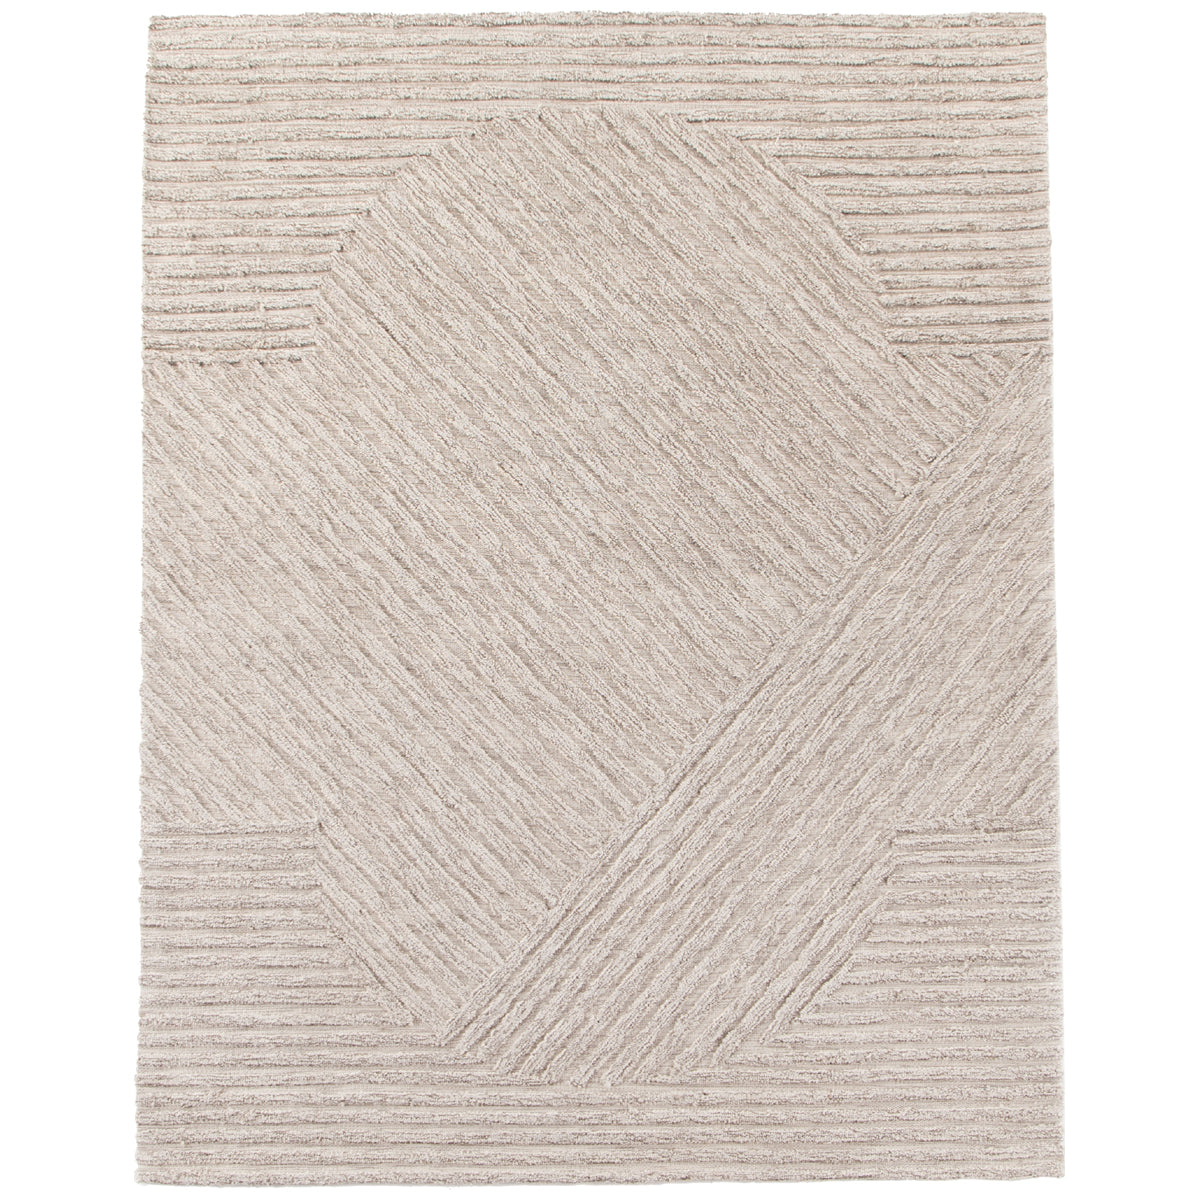 Four Hands Nomad Chasen Outdoor Rug, 9'x12'